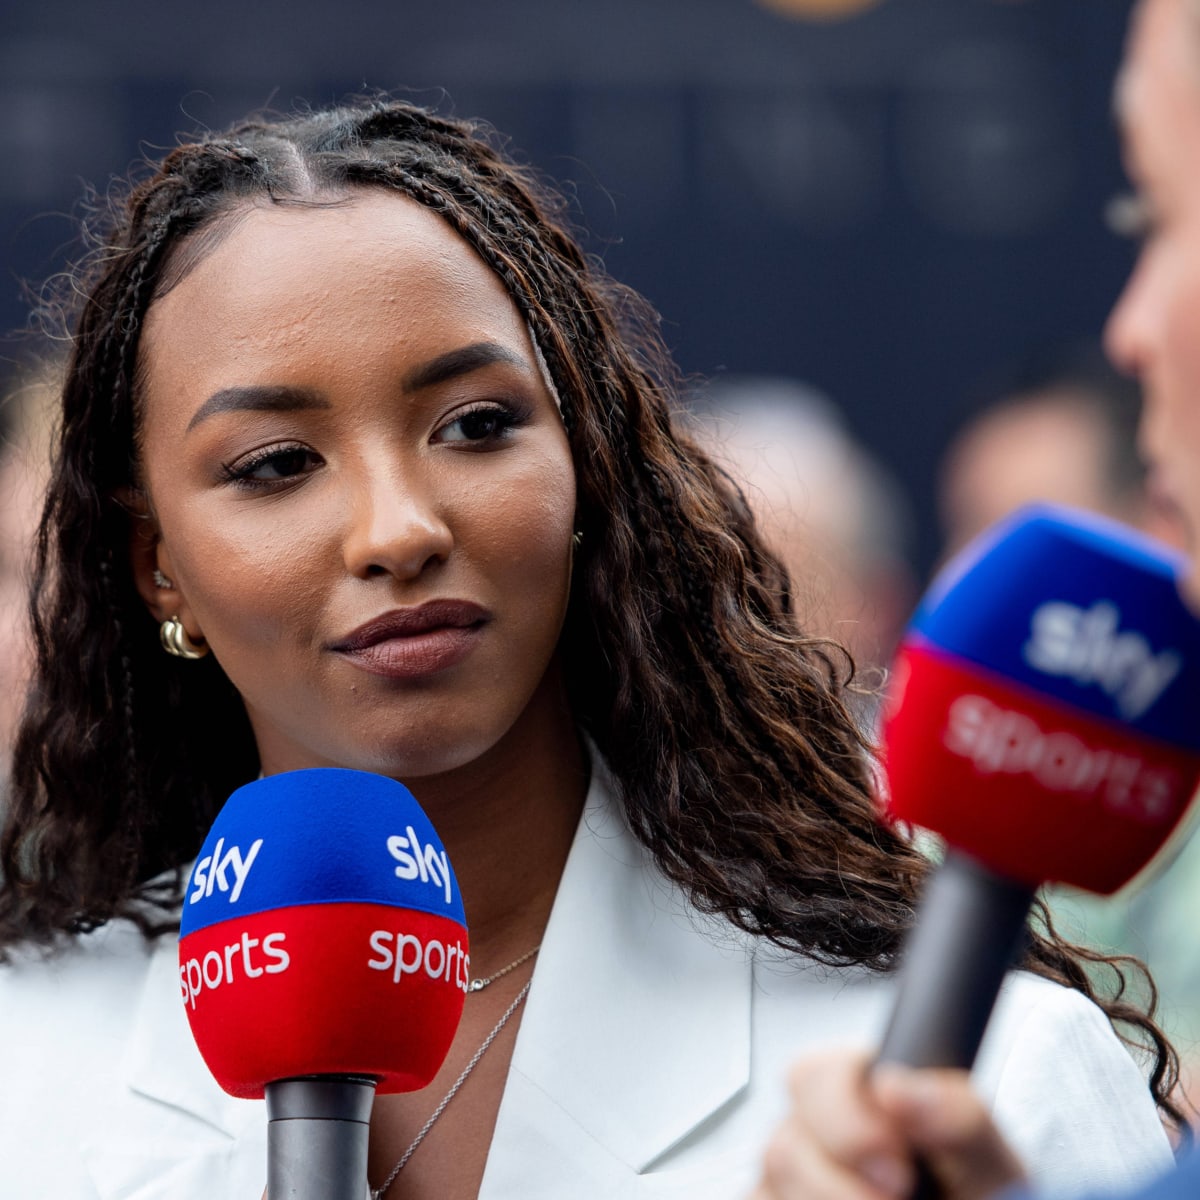 Sky Sports Naomi Schiff on her path from the track to F1 analyst